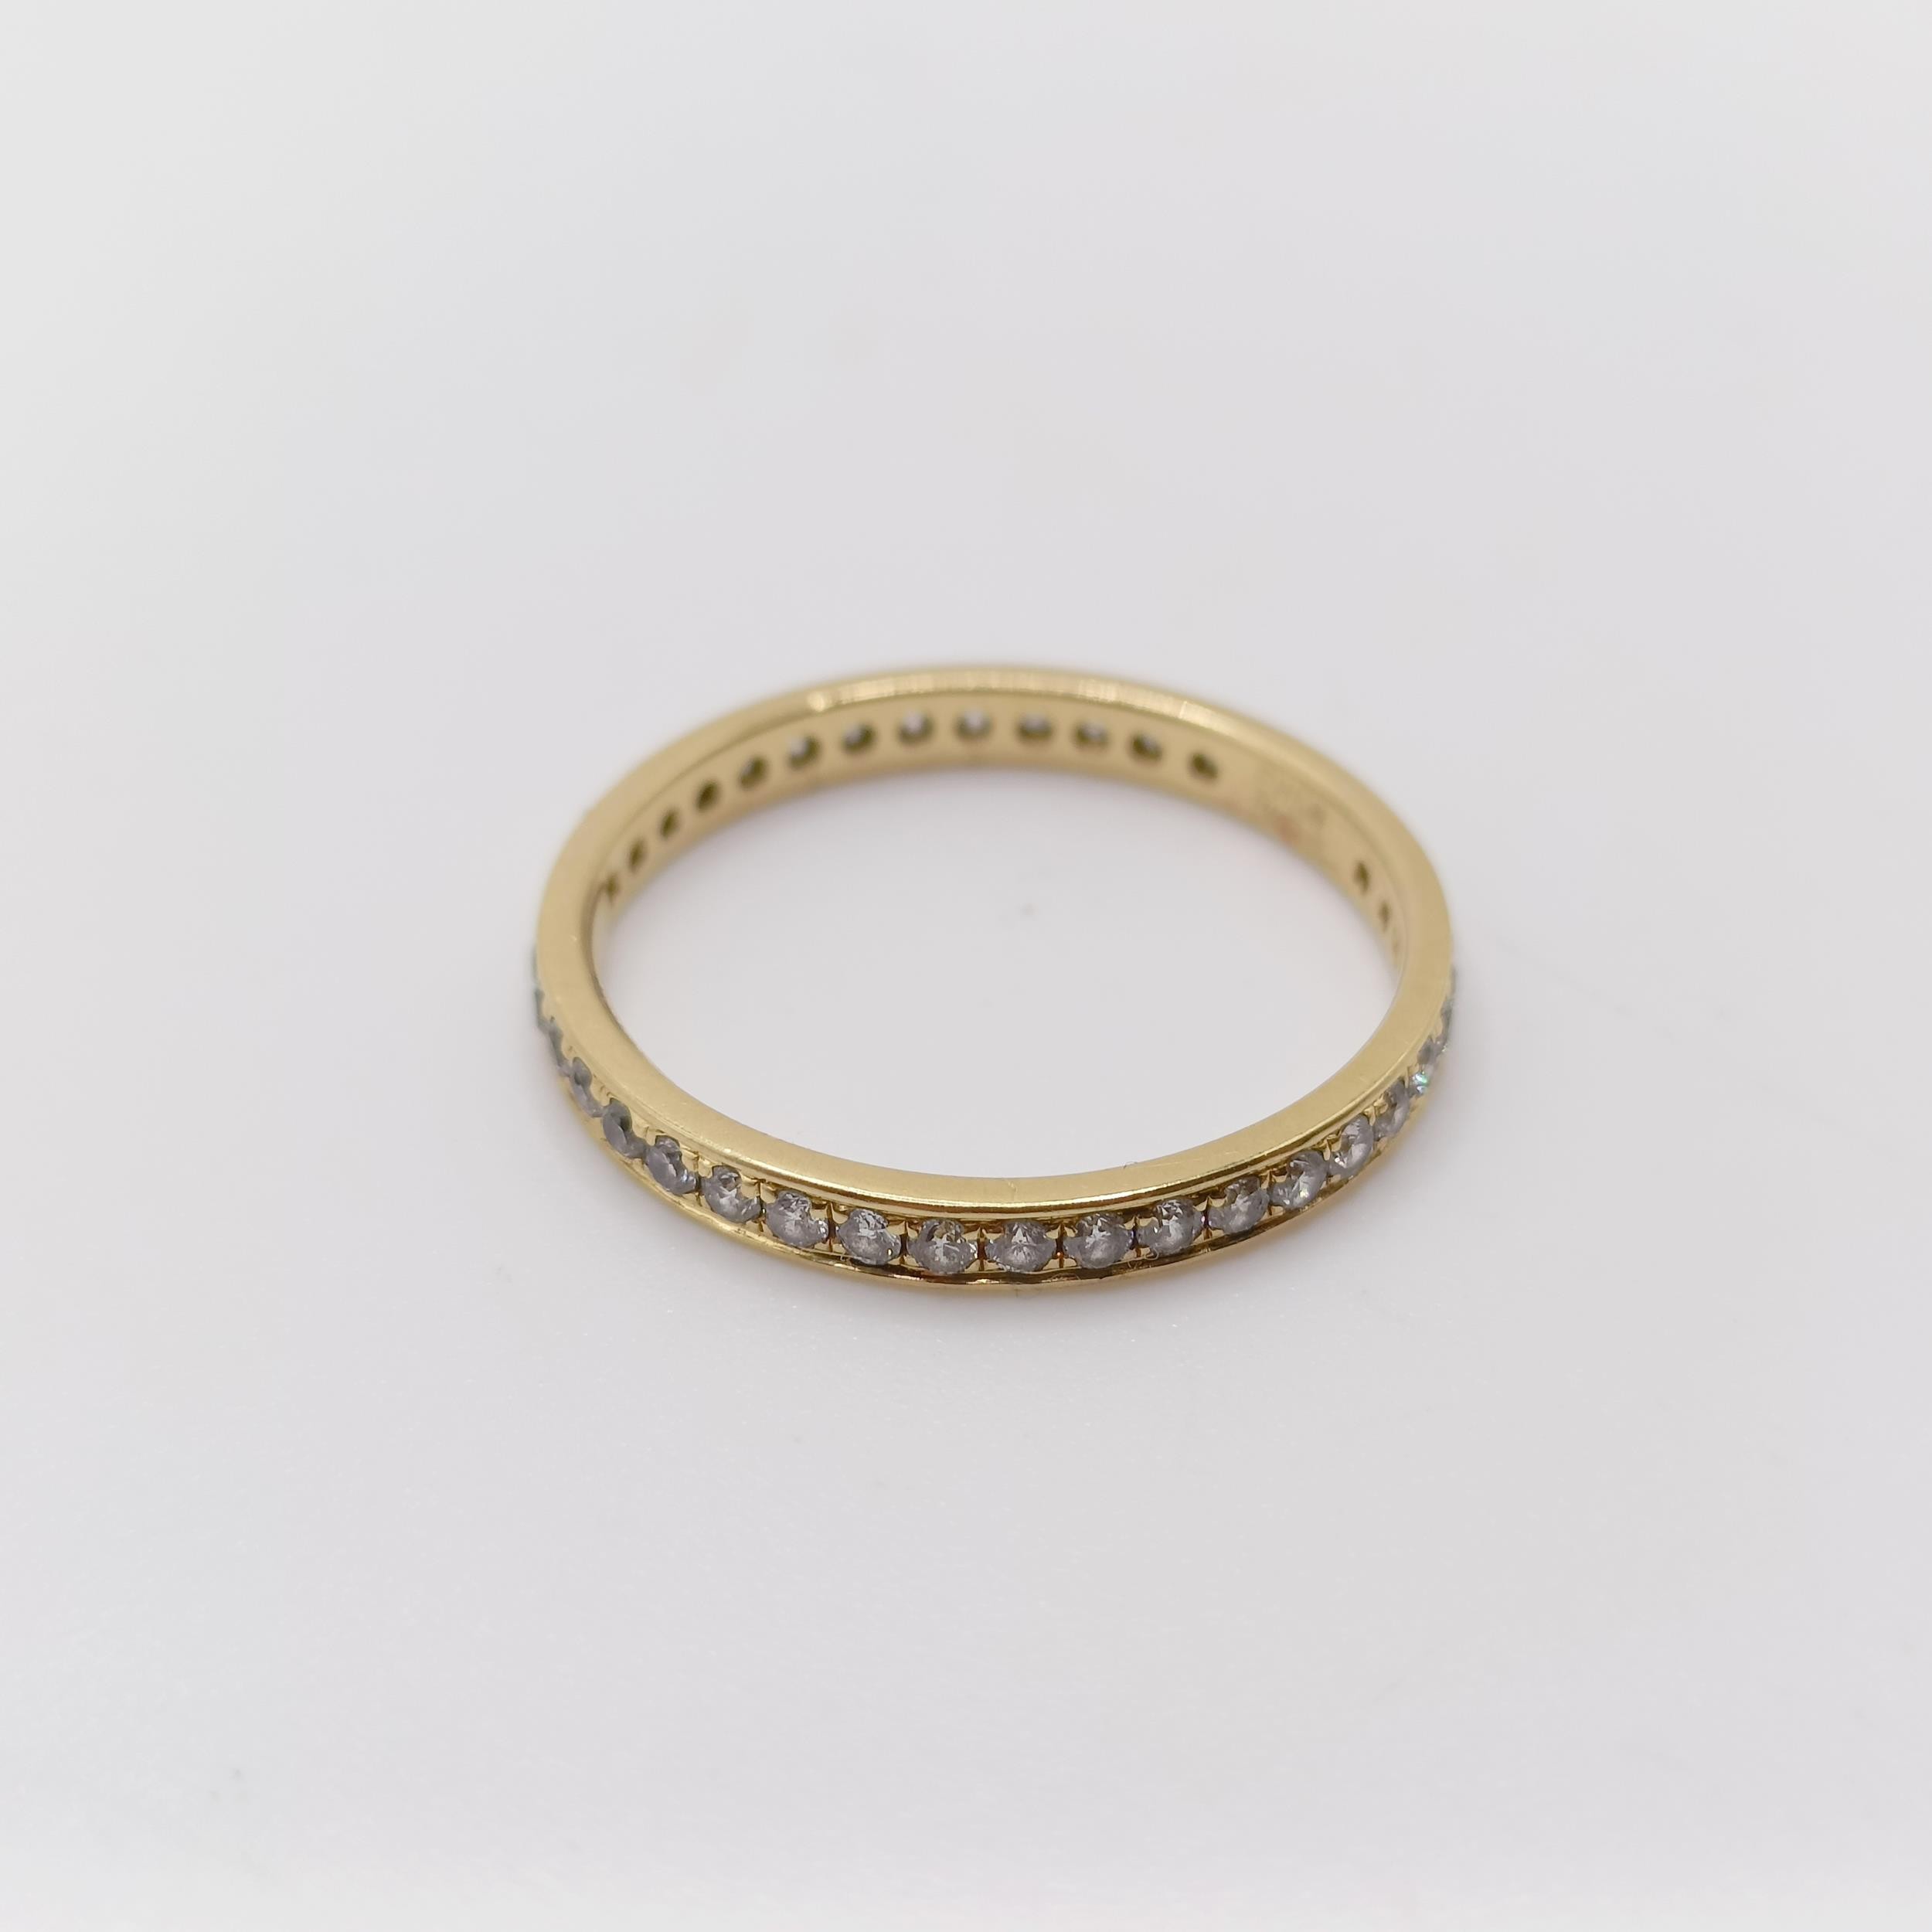 An 18ct gold and diamond ring, ring size L - Image 7 of 7